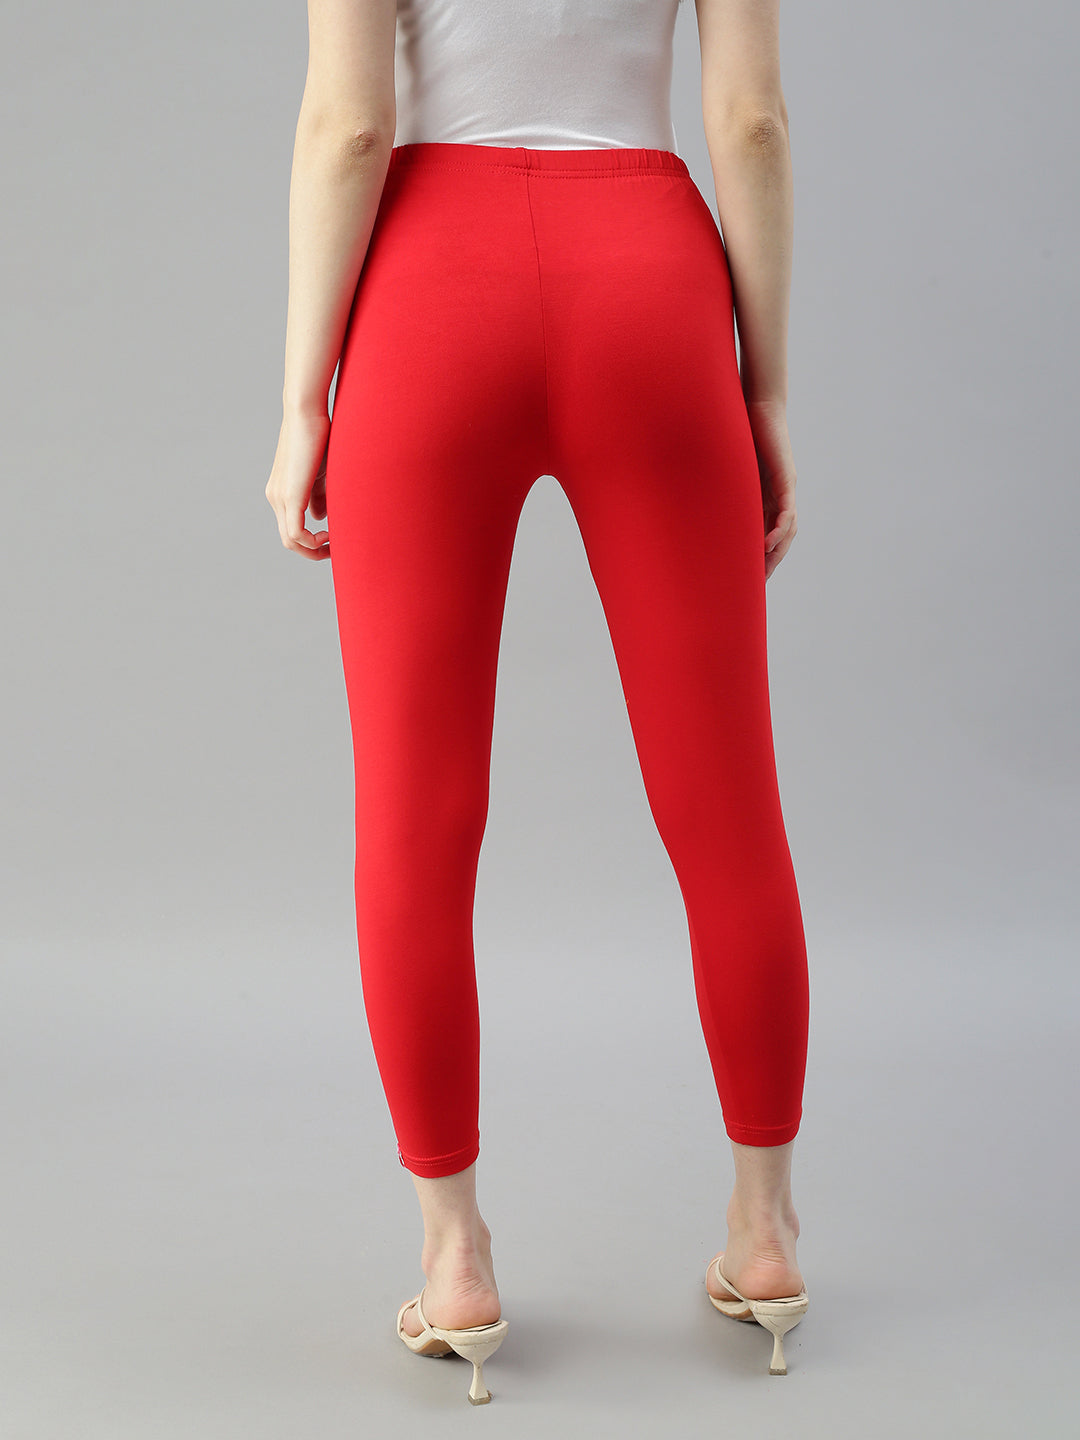 Red Cotton Readymade Leggings 182148 | Cotton, Red, Leggings